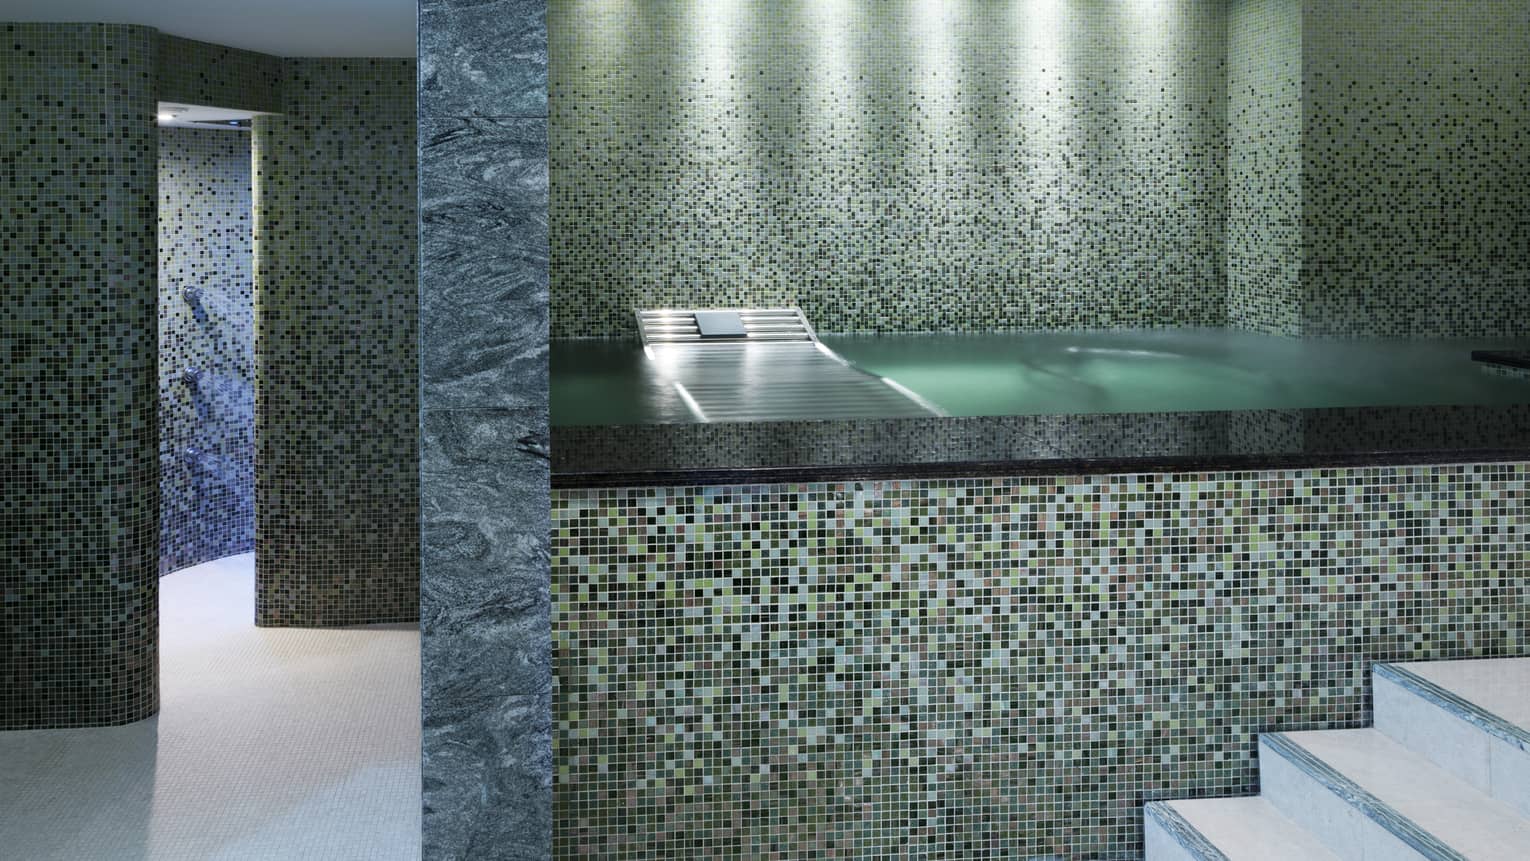 Raised bath with elaborate tile design in marble-and-tile spa room